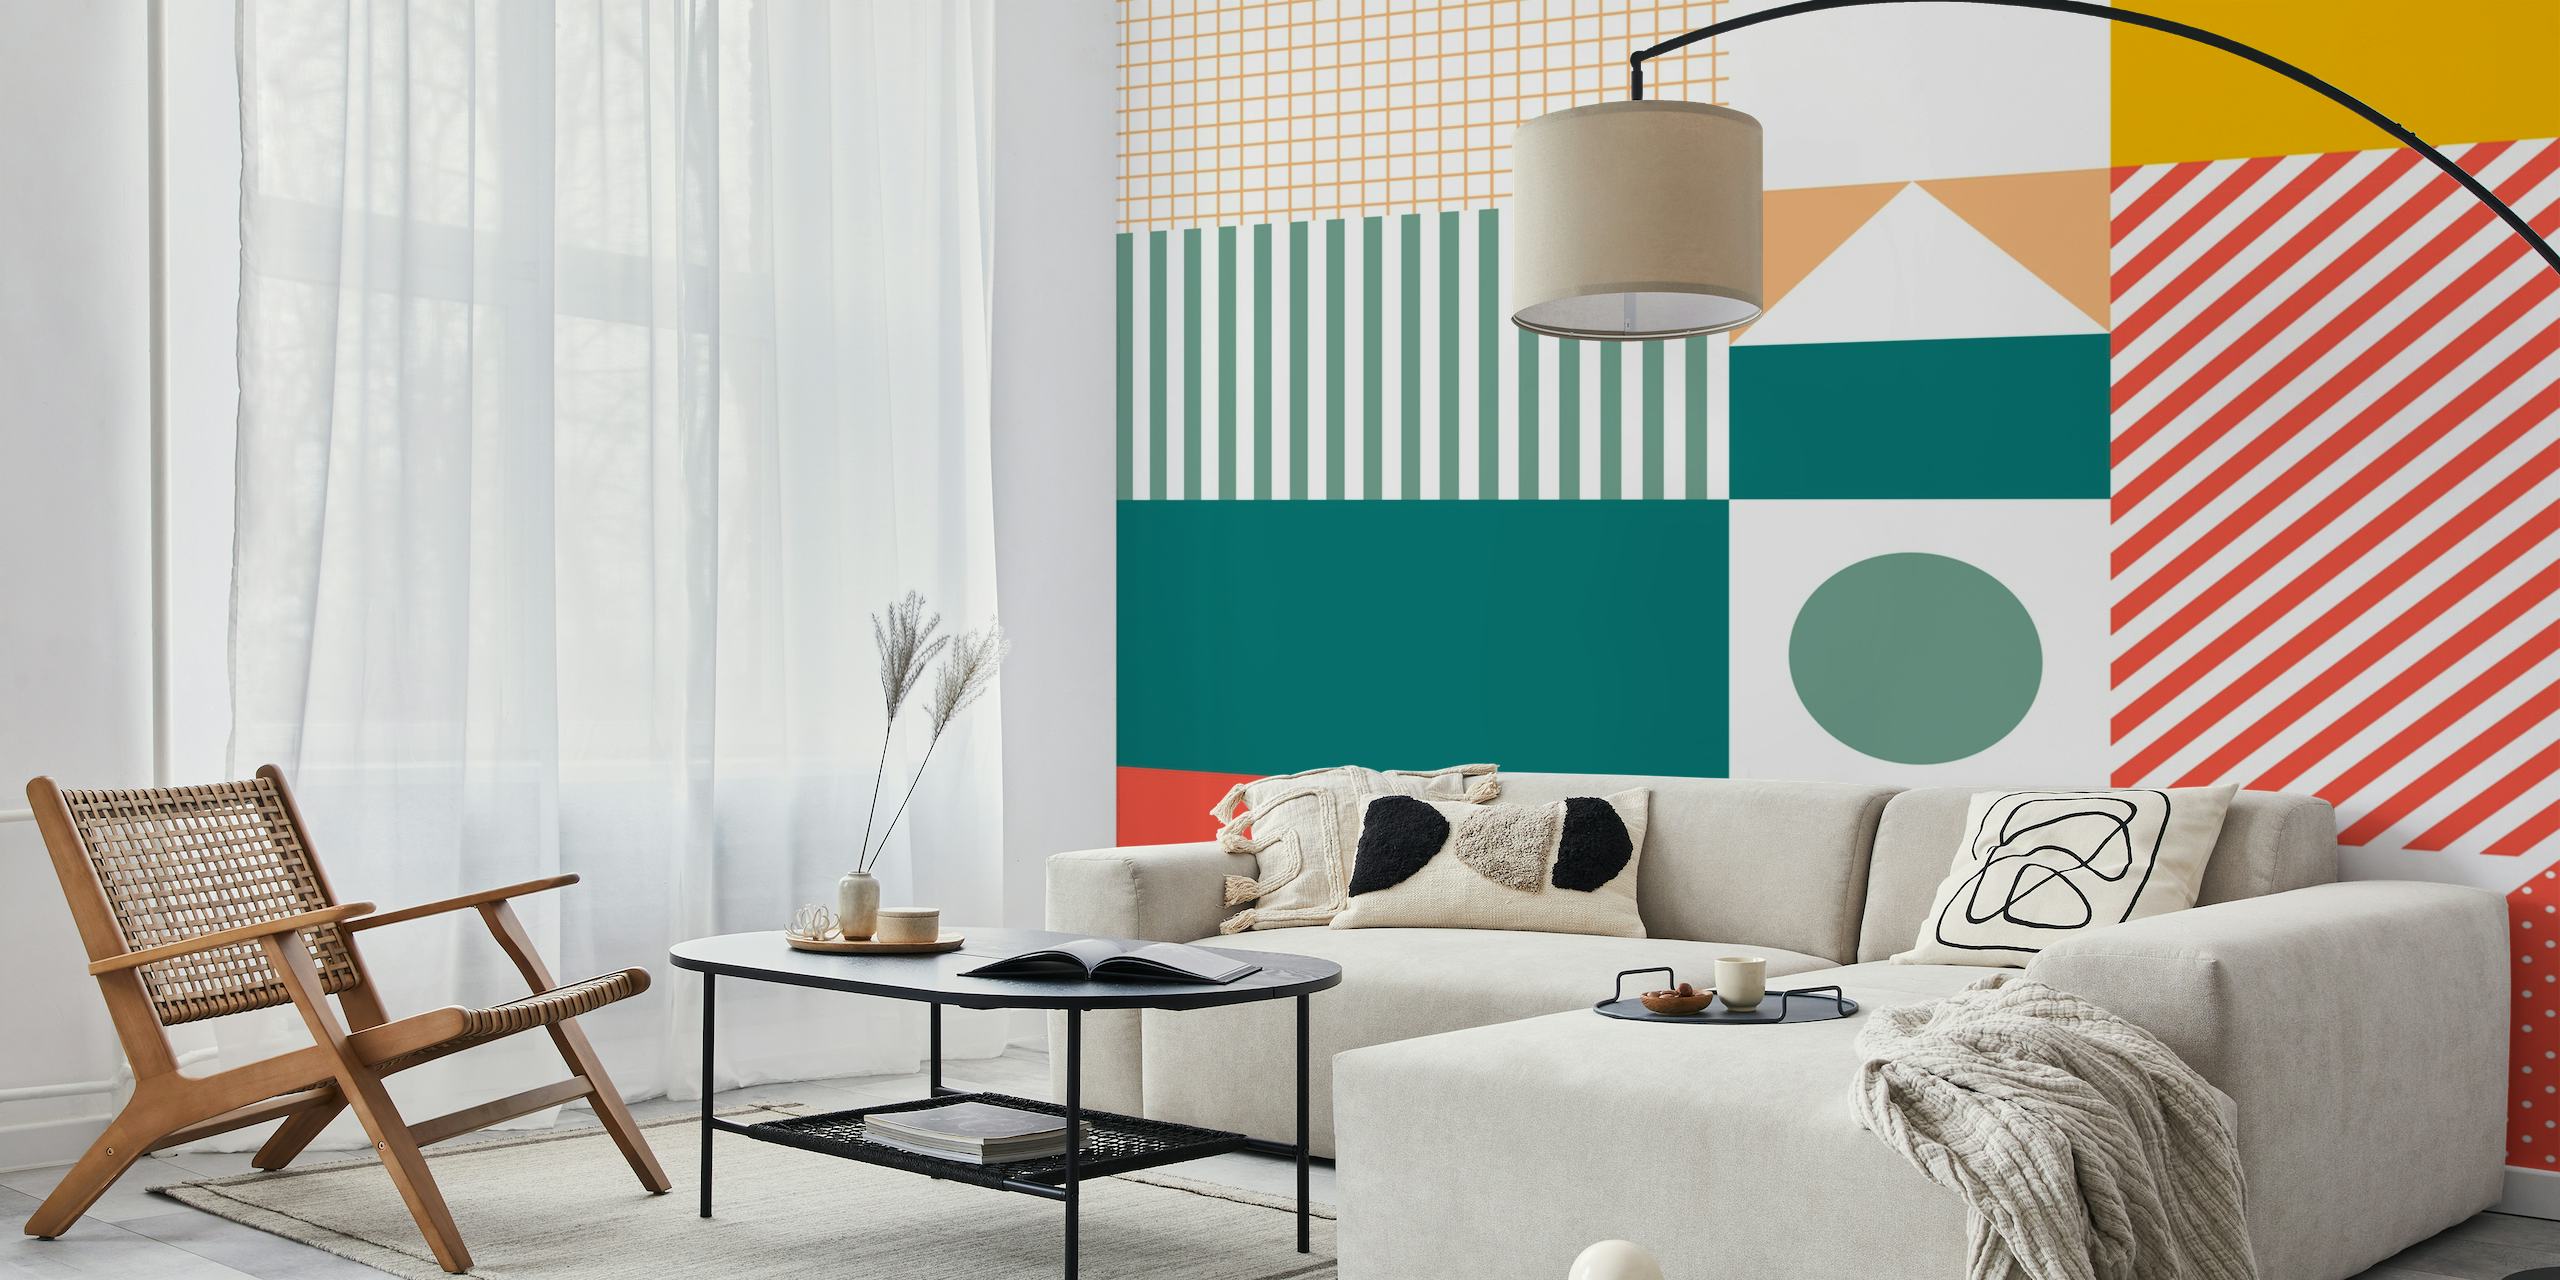 Colorful geometric patterns wall mural with a mix of chequered squares and stripes in tangerine, teal, and pastel hues.